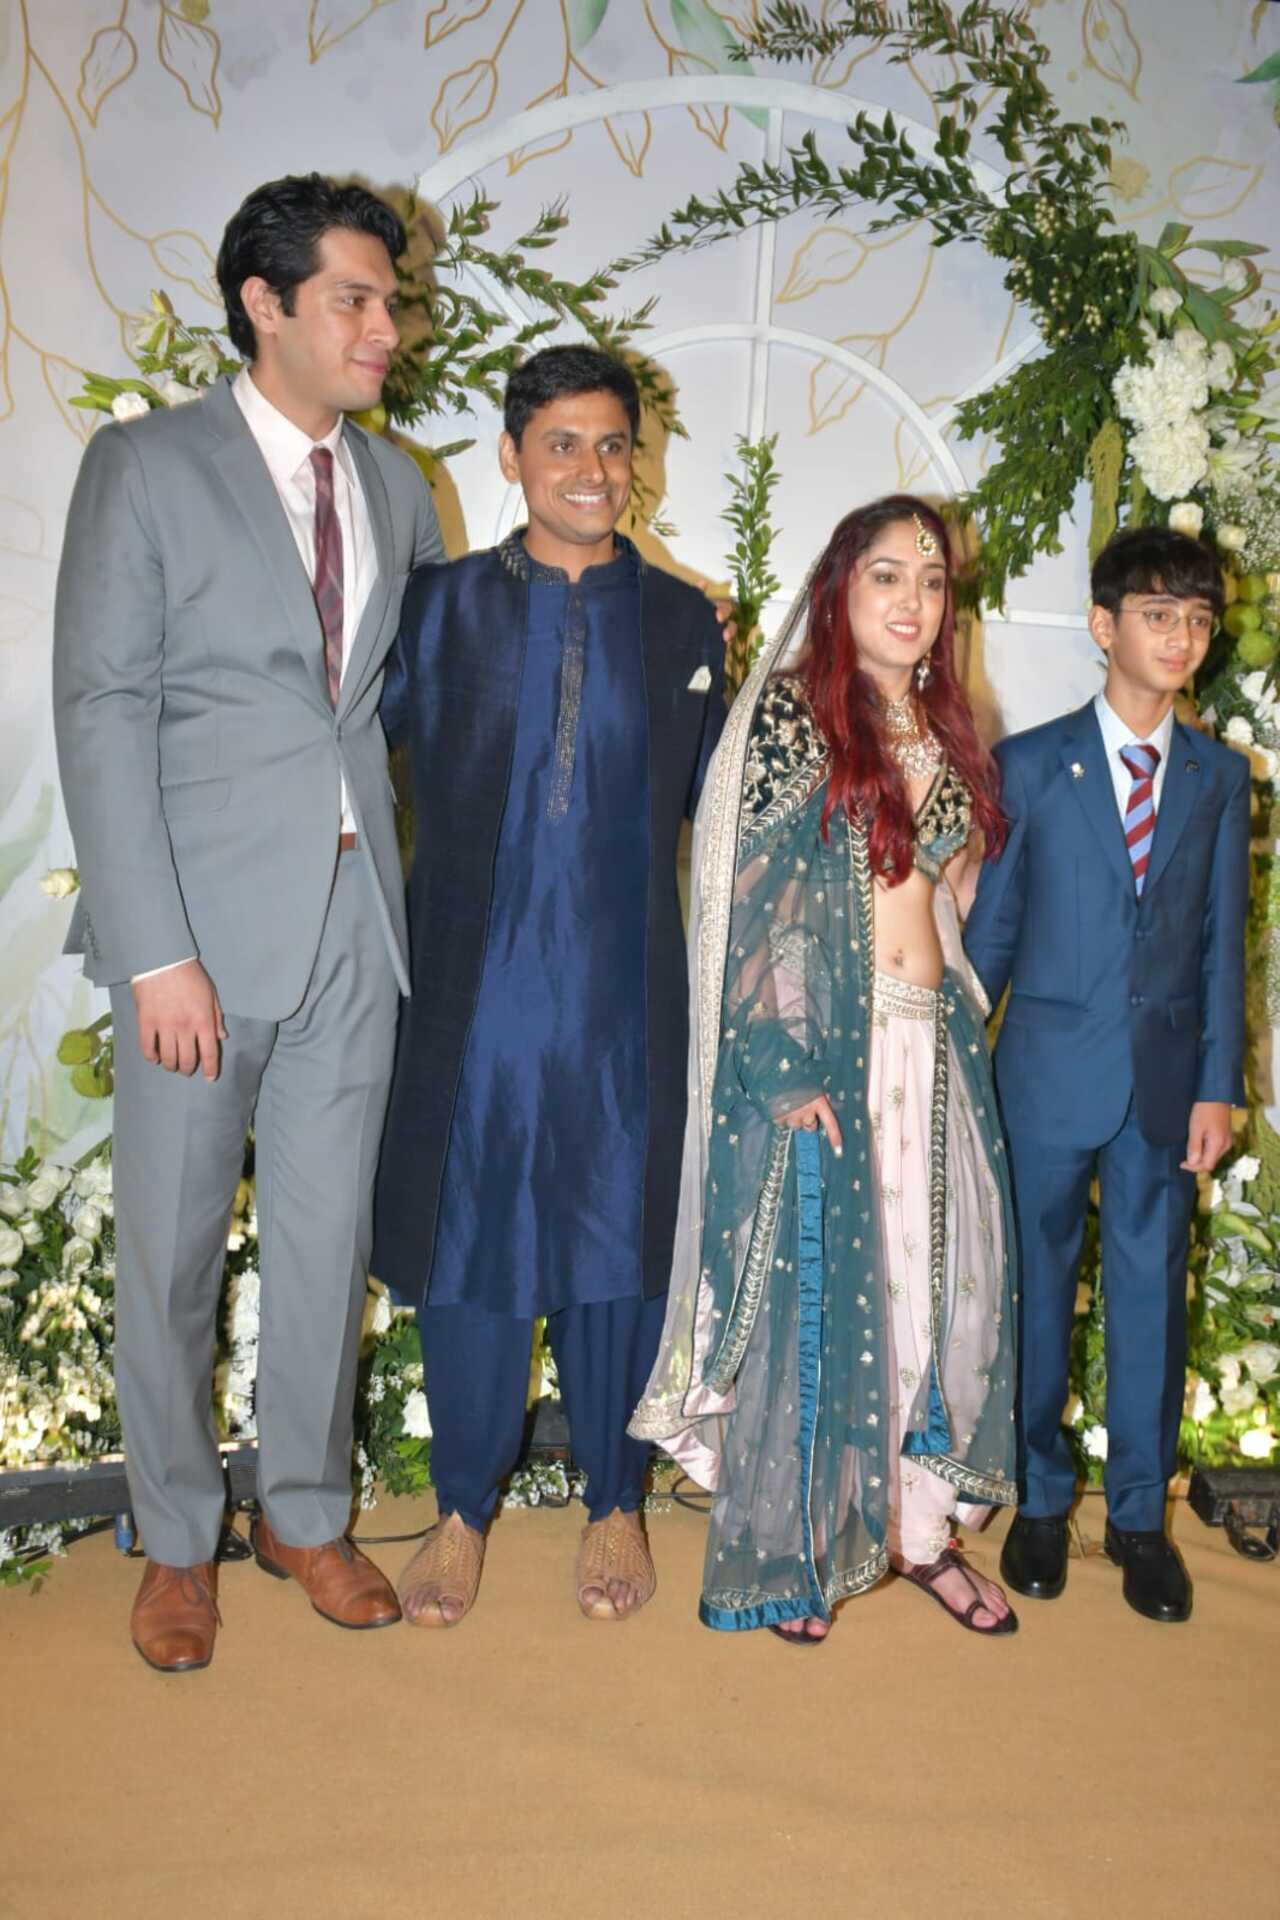 The Khan siblings pose together- Ira and Nupur pose with the bride's brothers Junaid and Azad. The two brothers looked dashing in a suit for Ira's big day